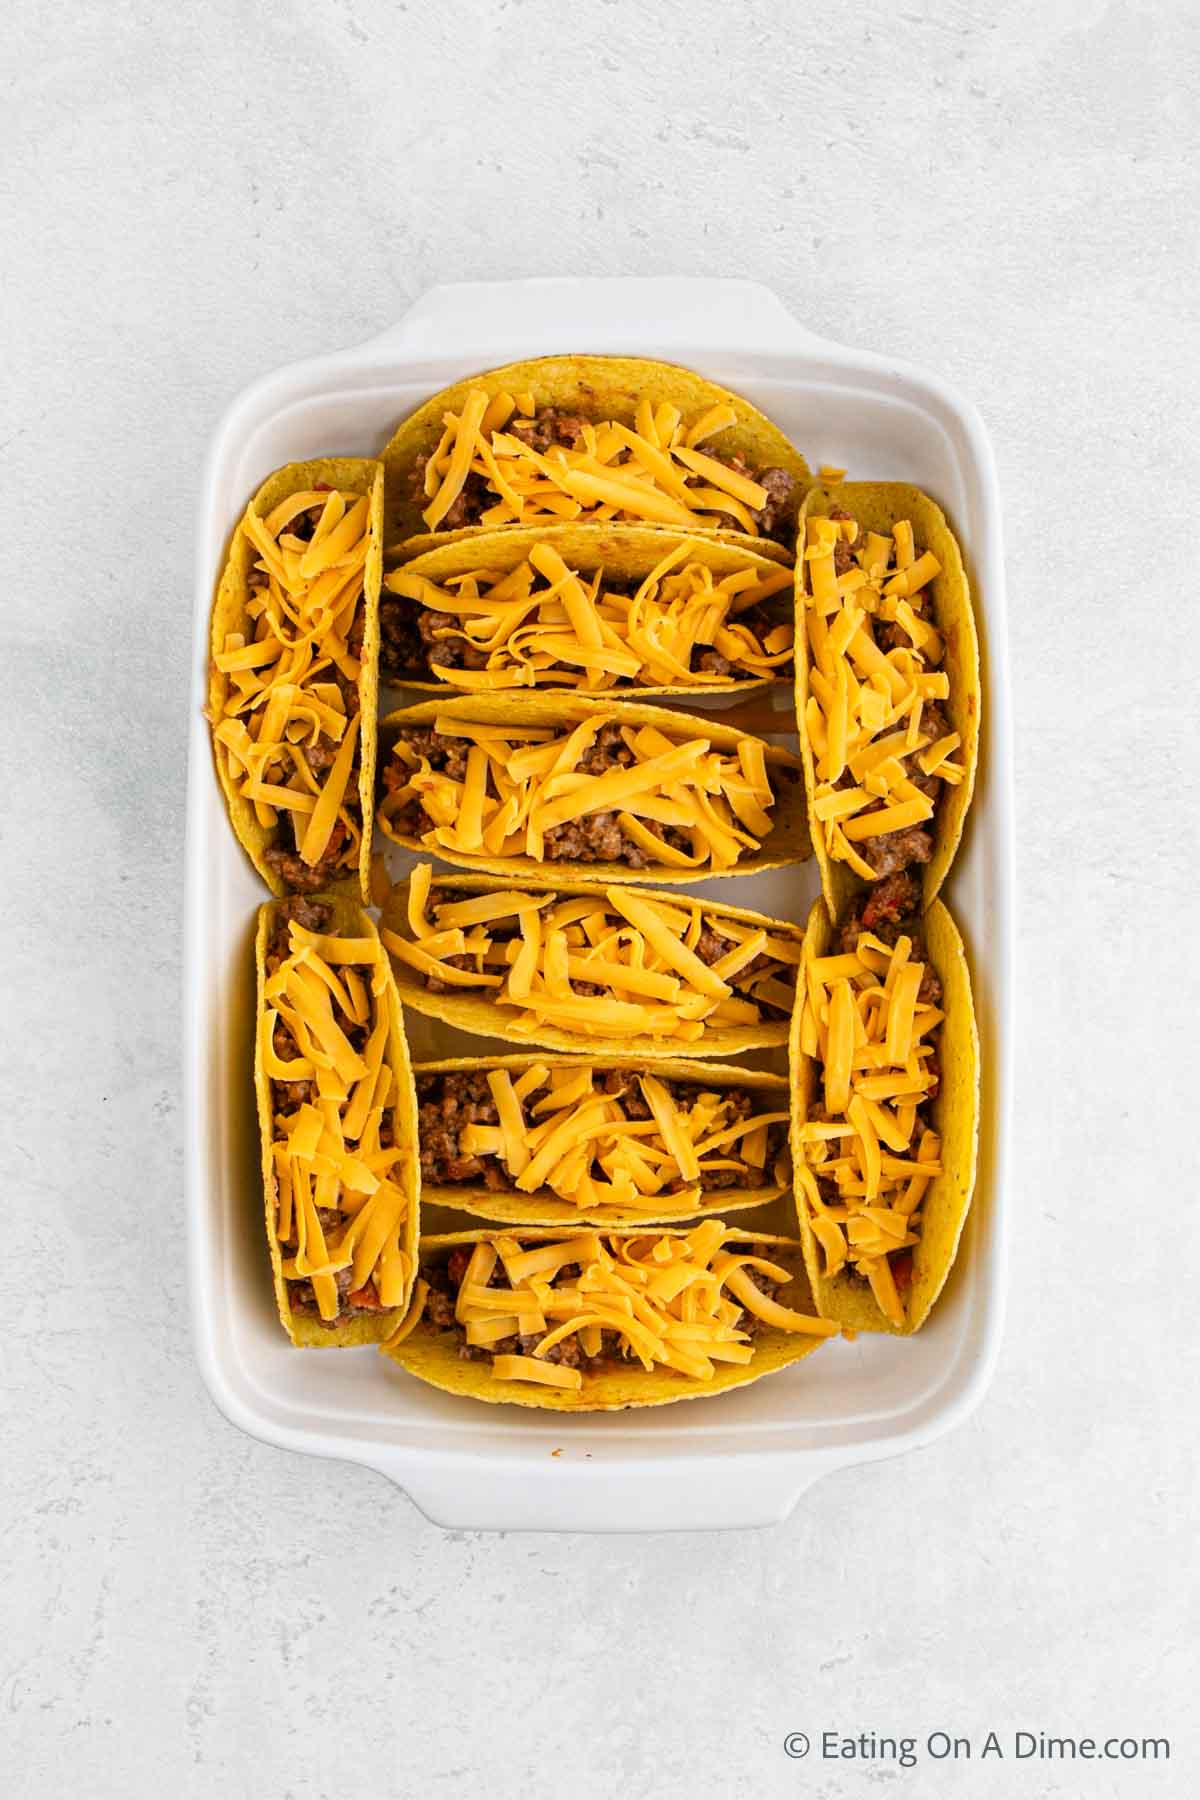 Topping the ground beef with shredded cheese in a baking dish